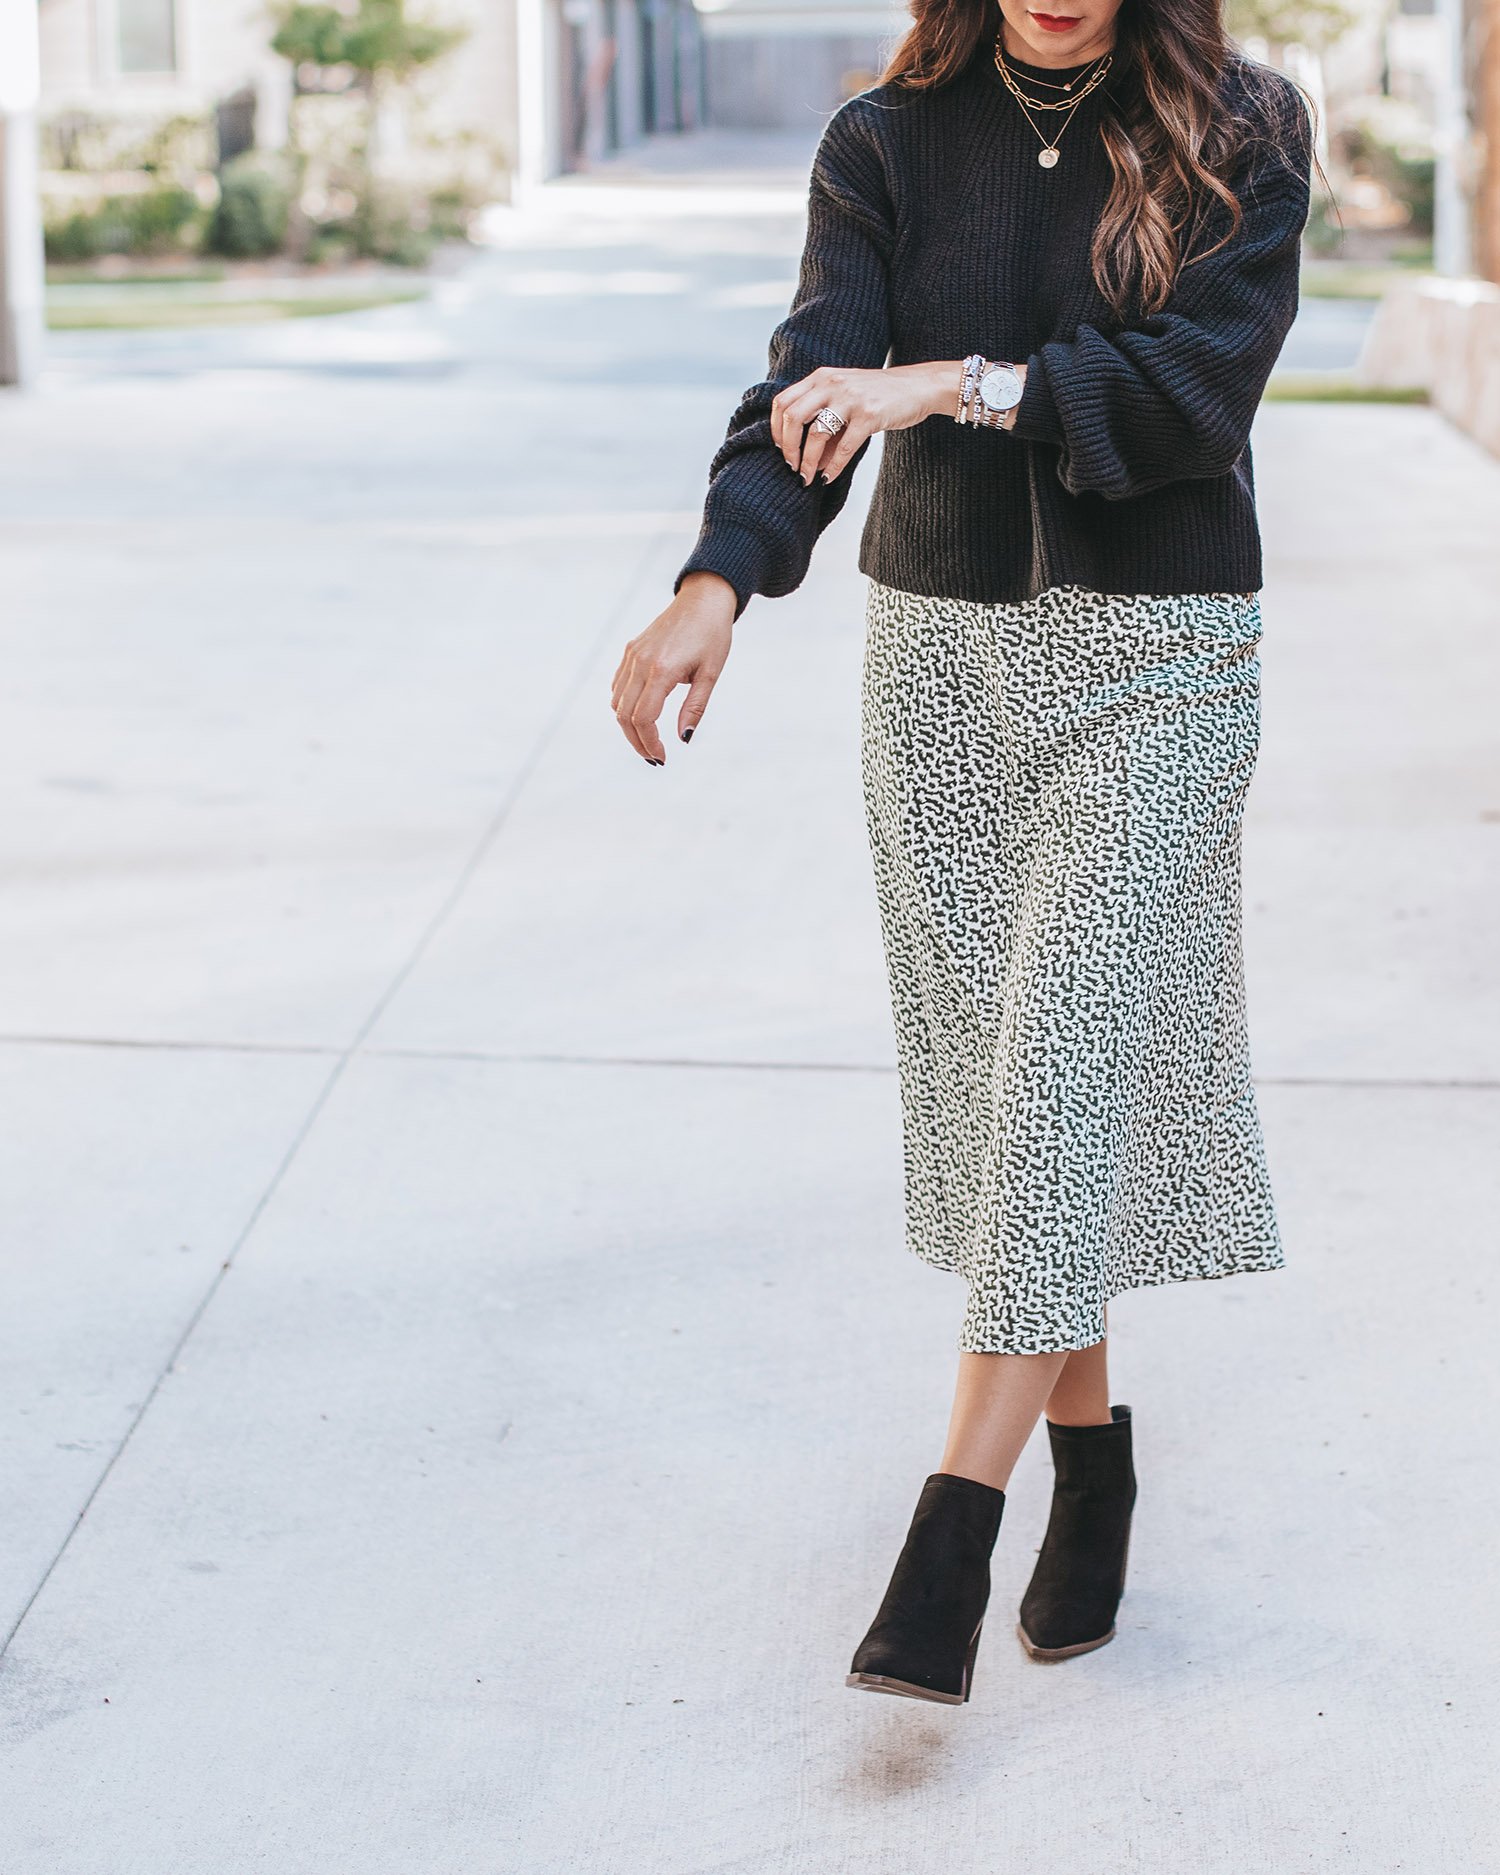 Mixing Textures for Fall Outfits Women